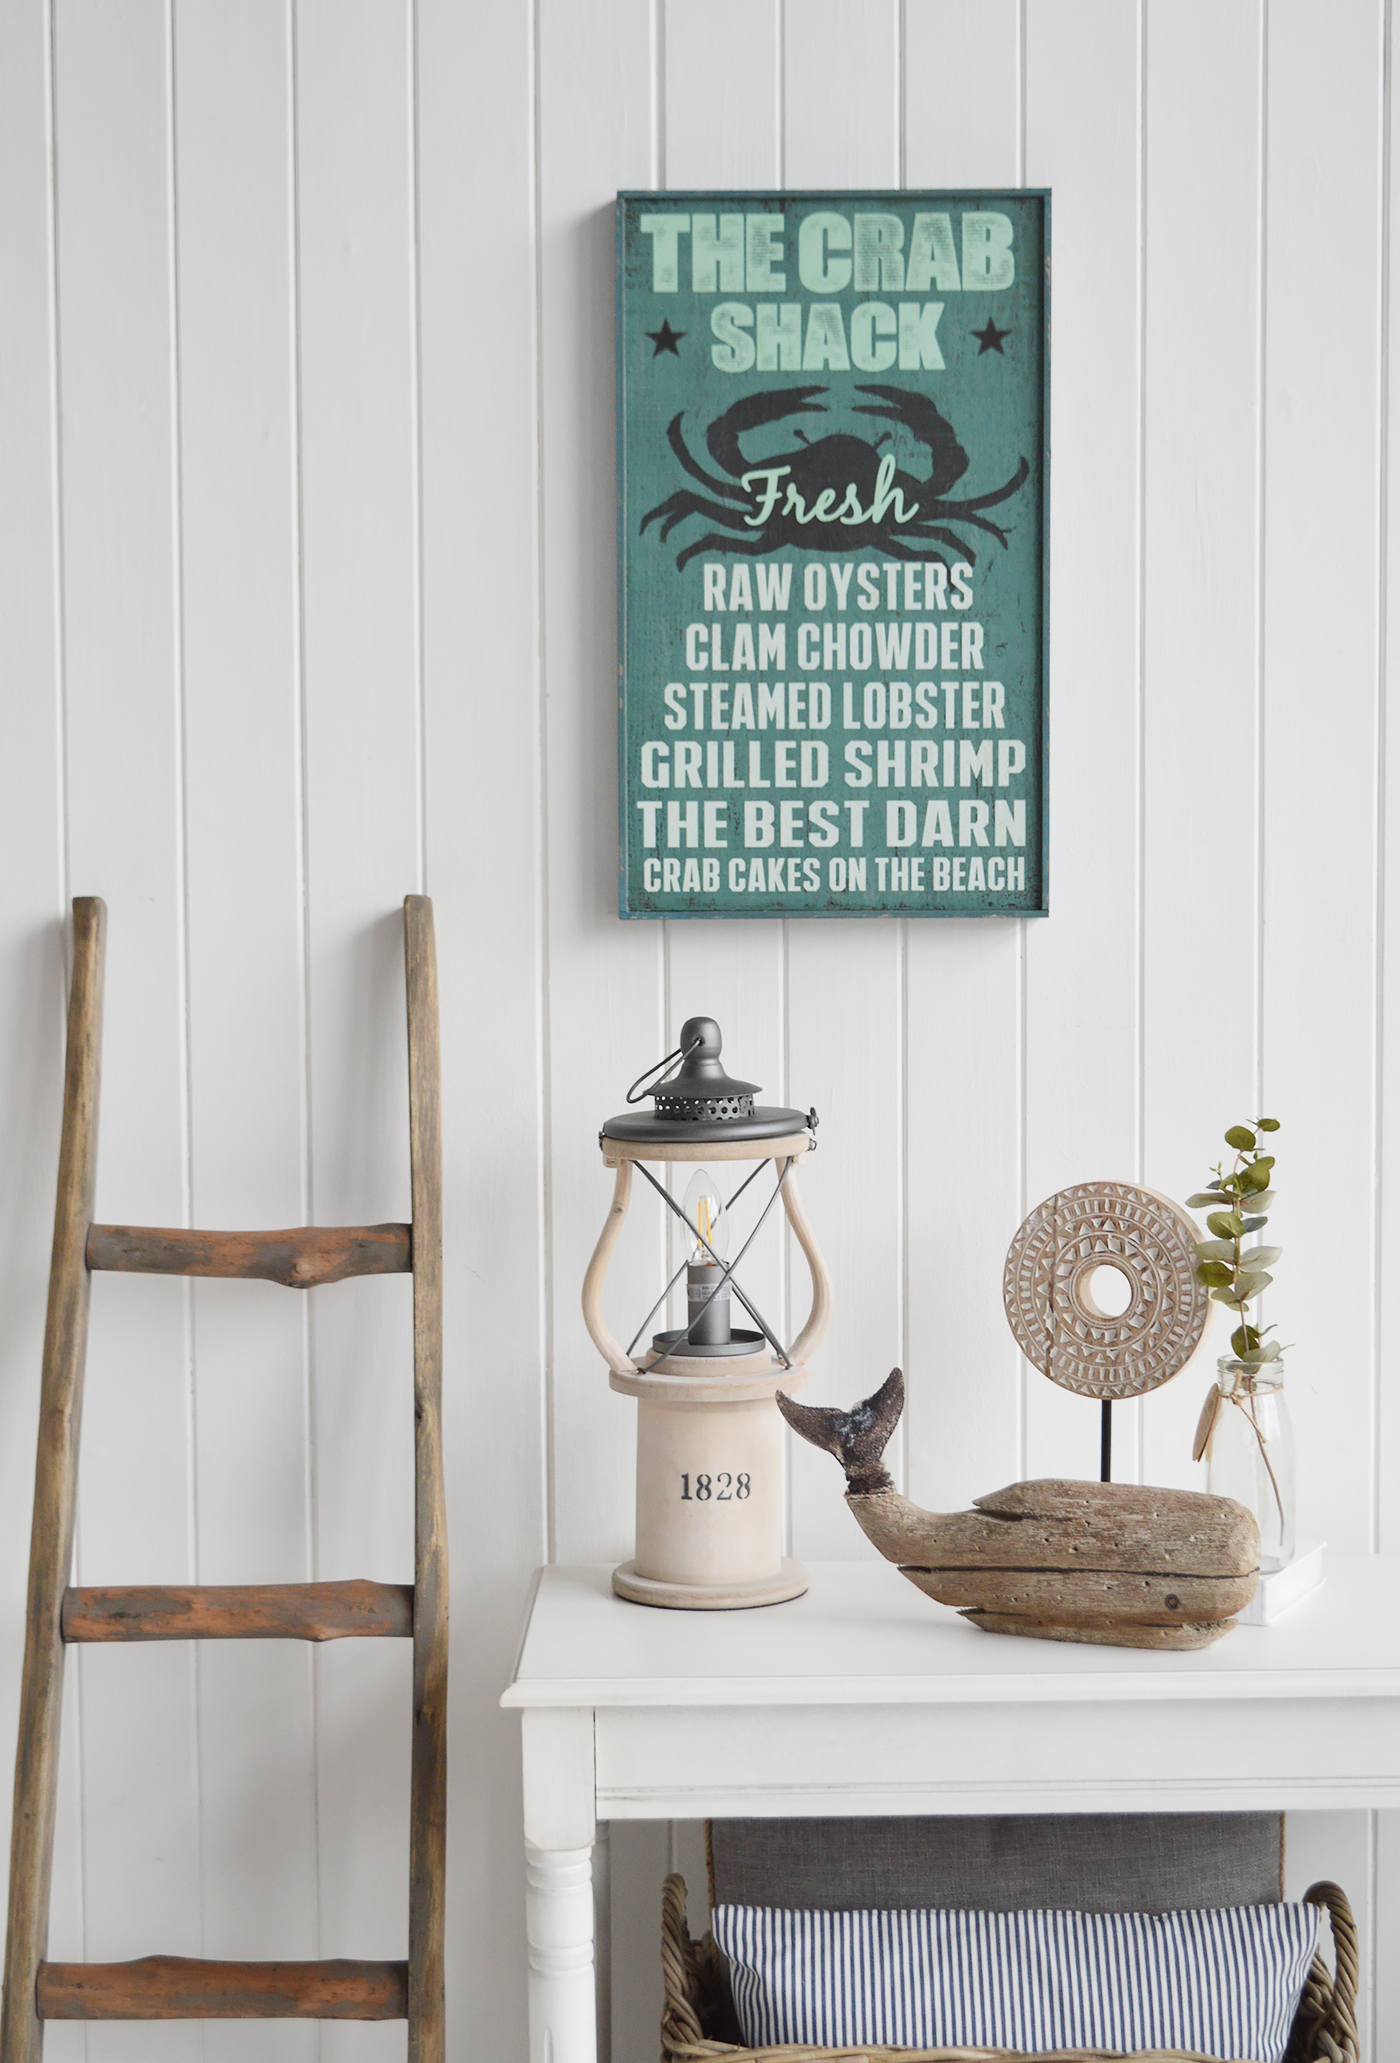 Nautical New England Coastal  Furniture and accessories for the home. A quirky, colourful Crab Shack New England sign typical for restaurants in the coastal areas the White Lighthouse Furniture and Home interiors